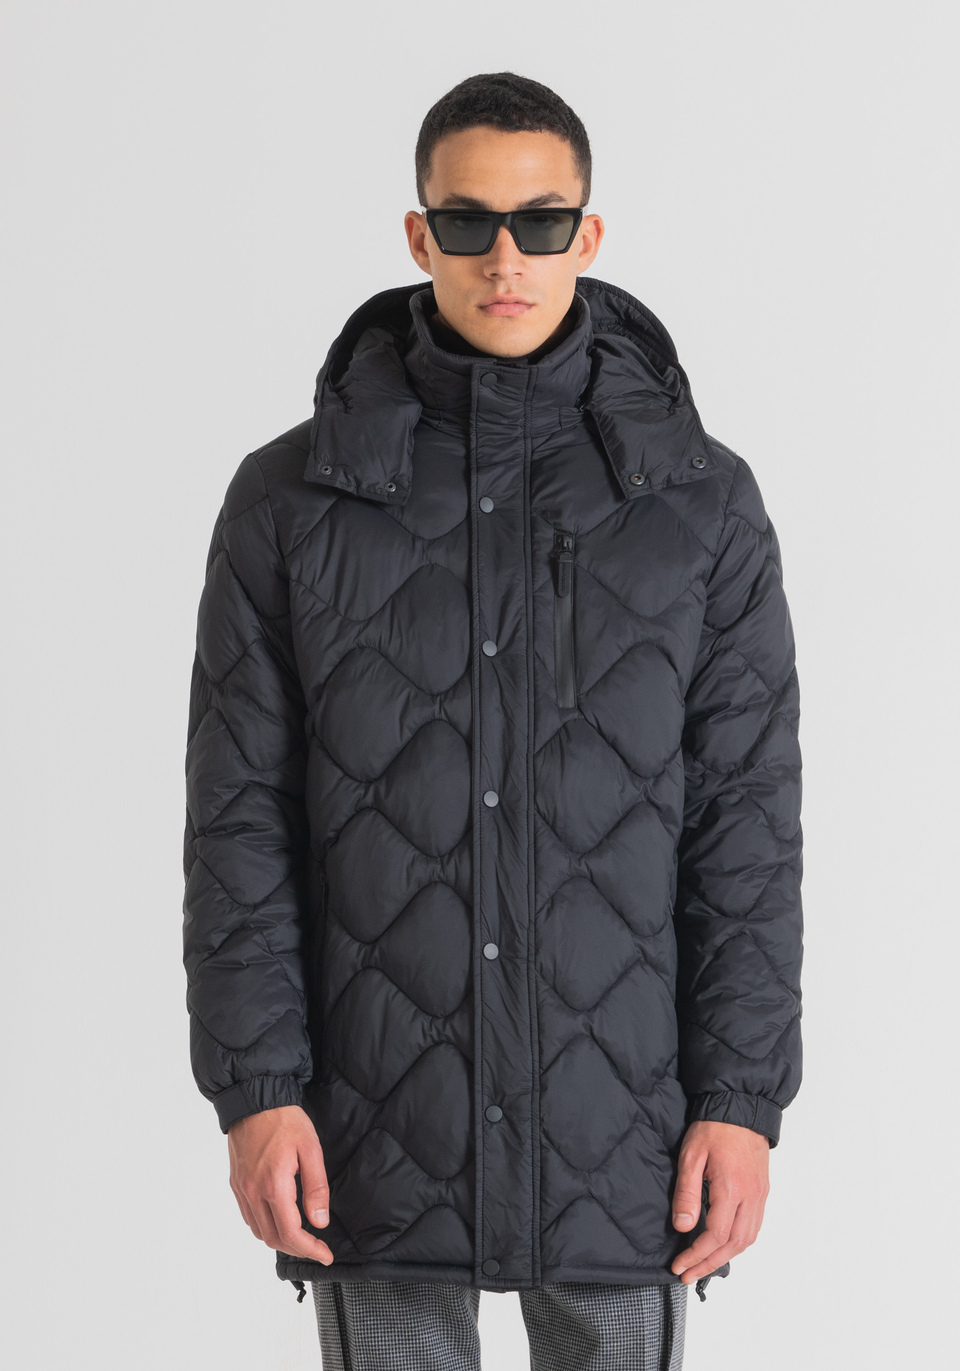 LONG REGULAR-FIT DOWN JACKET IN QUILTED TECHNICAL FABRIC - Antony Morato Online Shop